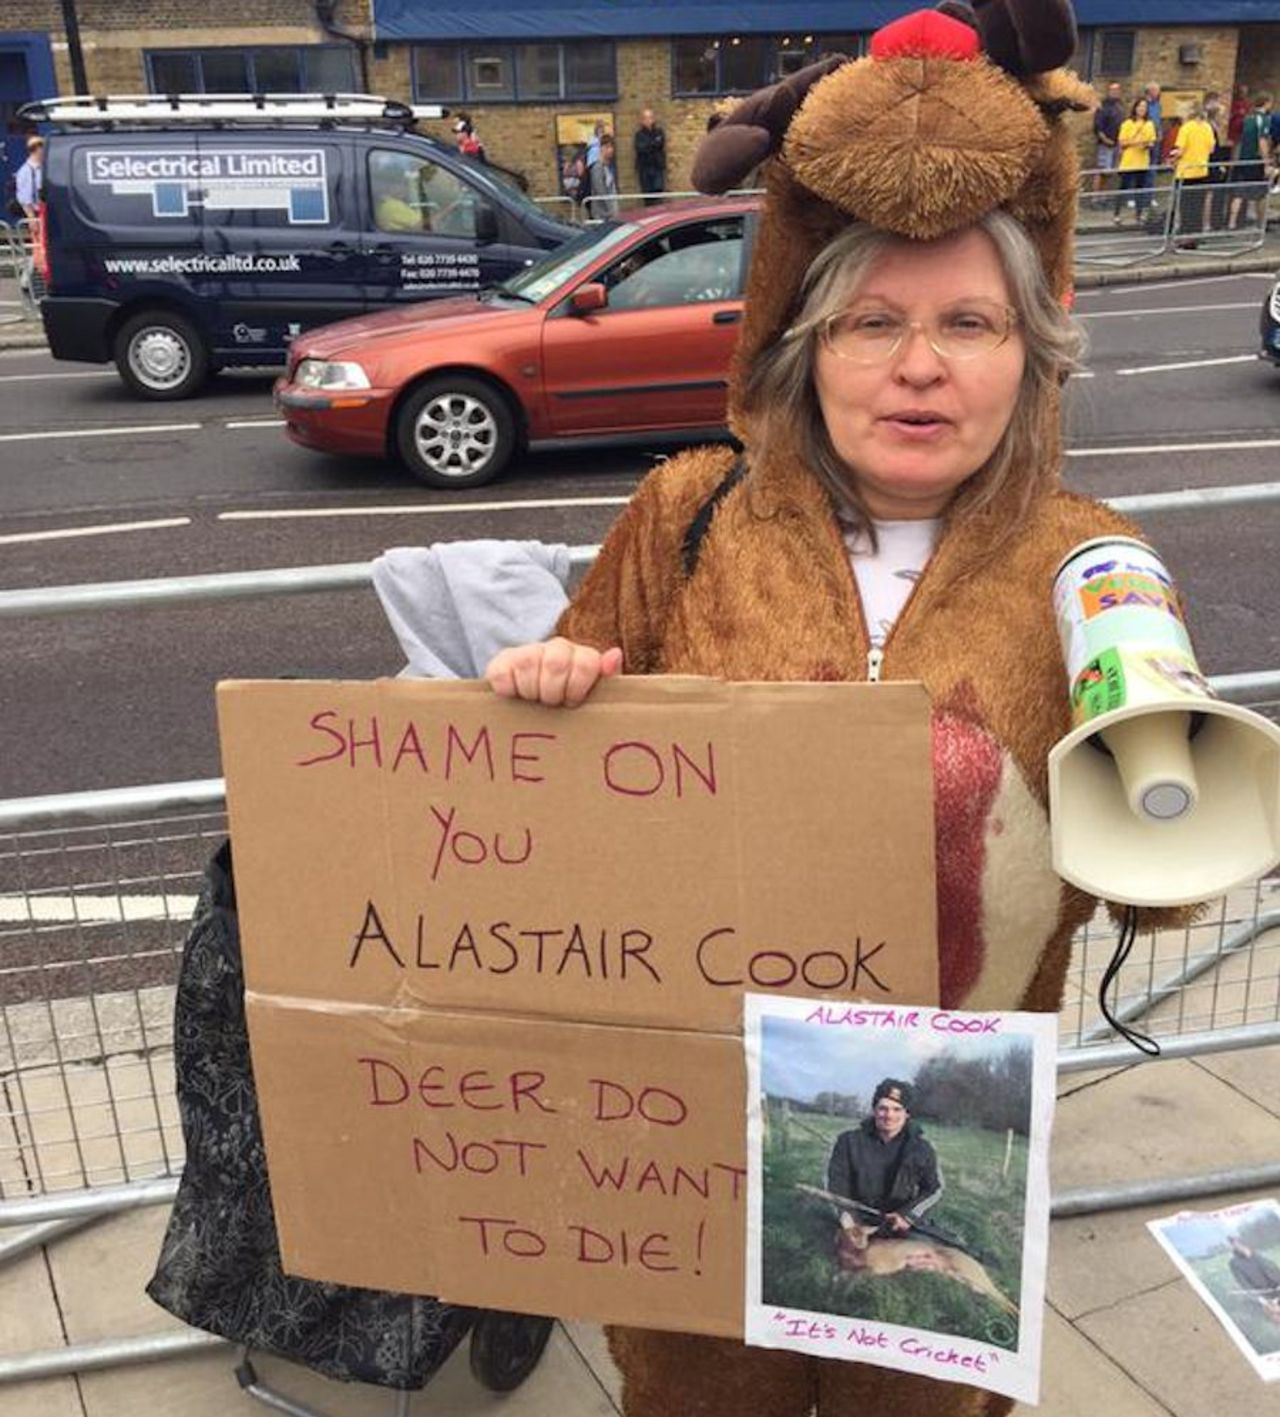 A lone protestor opposes Alastair Cook's fondness for country sports outside the Kia Oval before the final Ashes Test